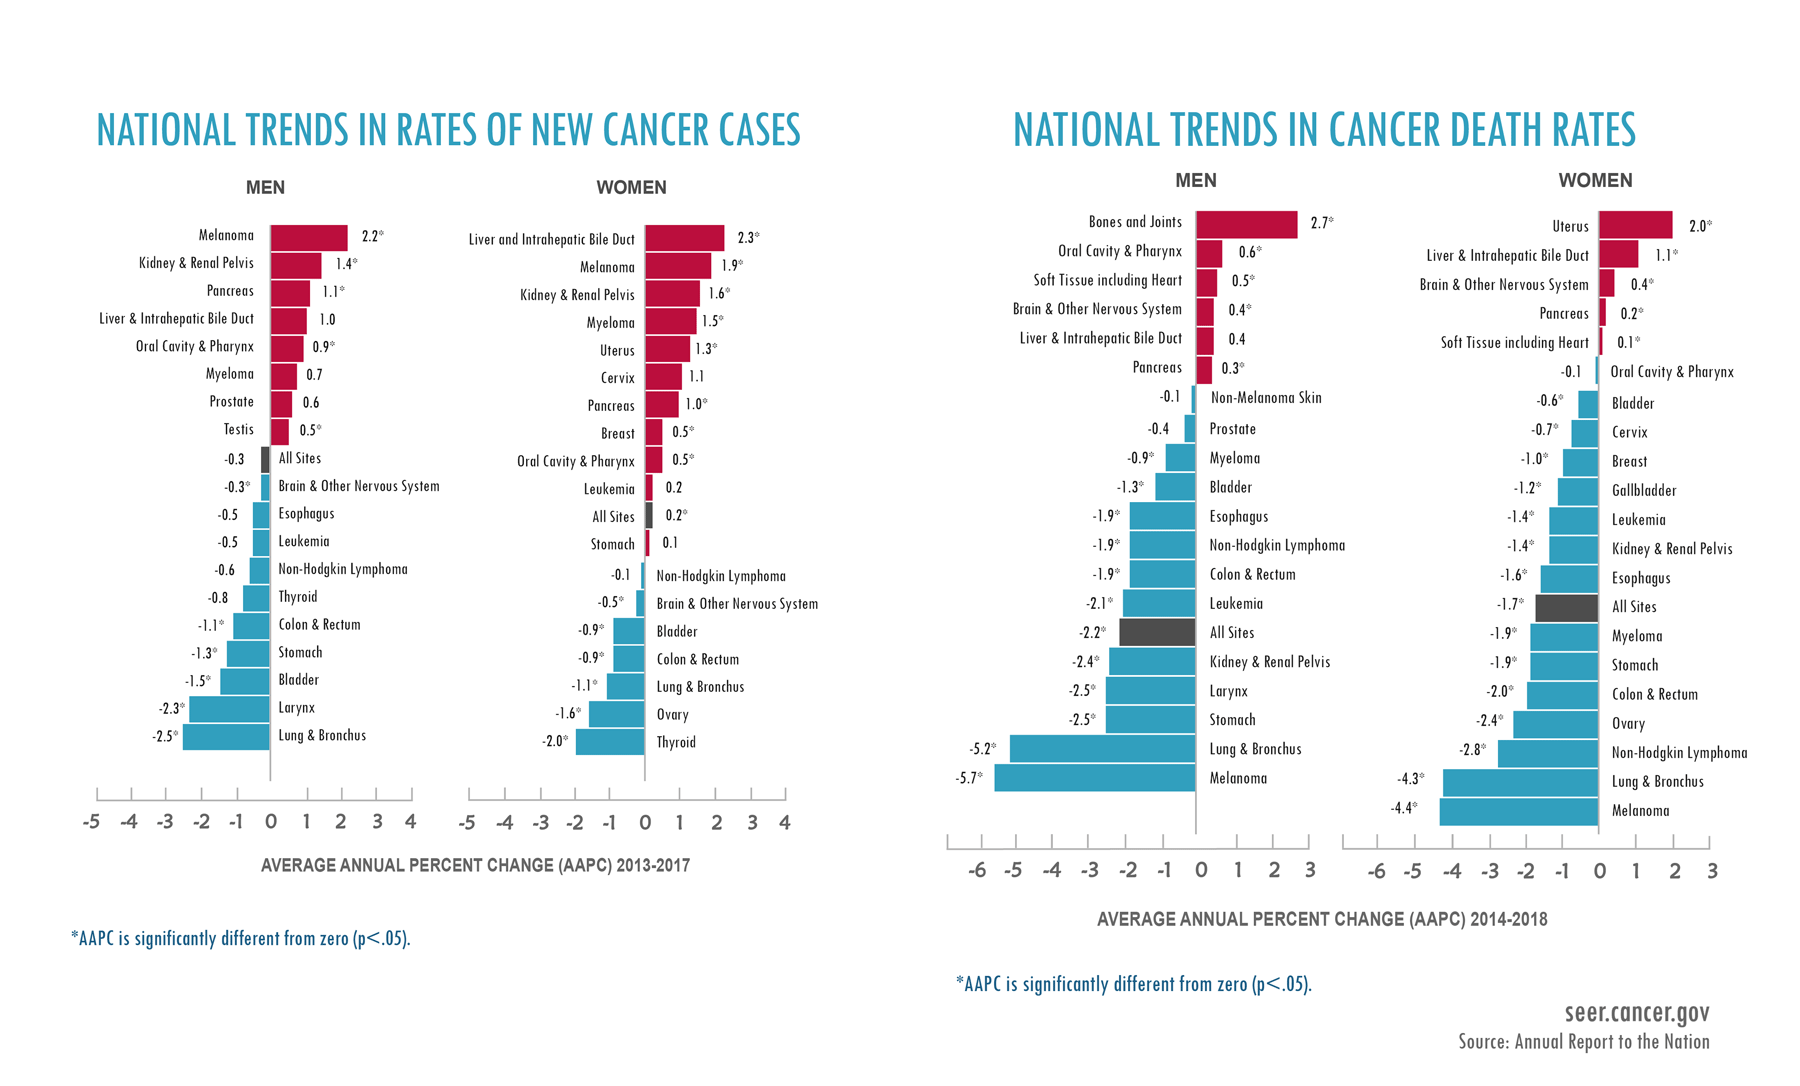 National trends in rates of new cancer cases and cancer death rates